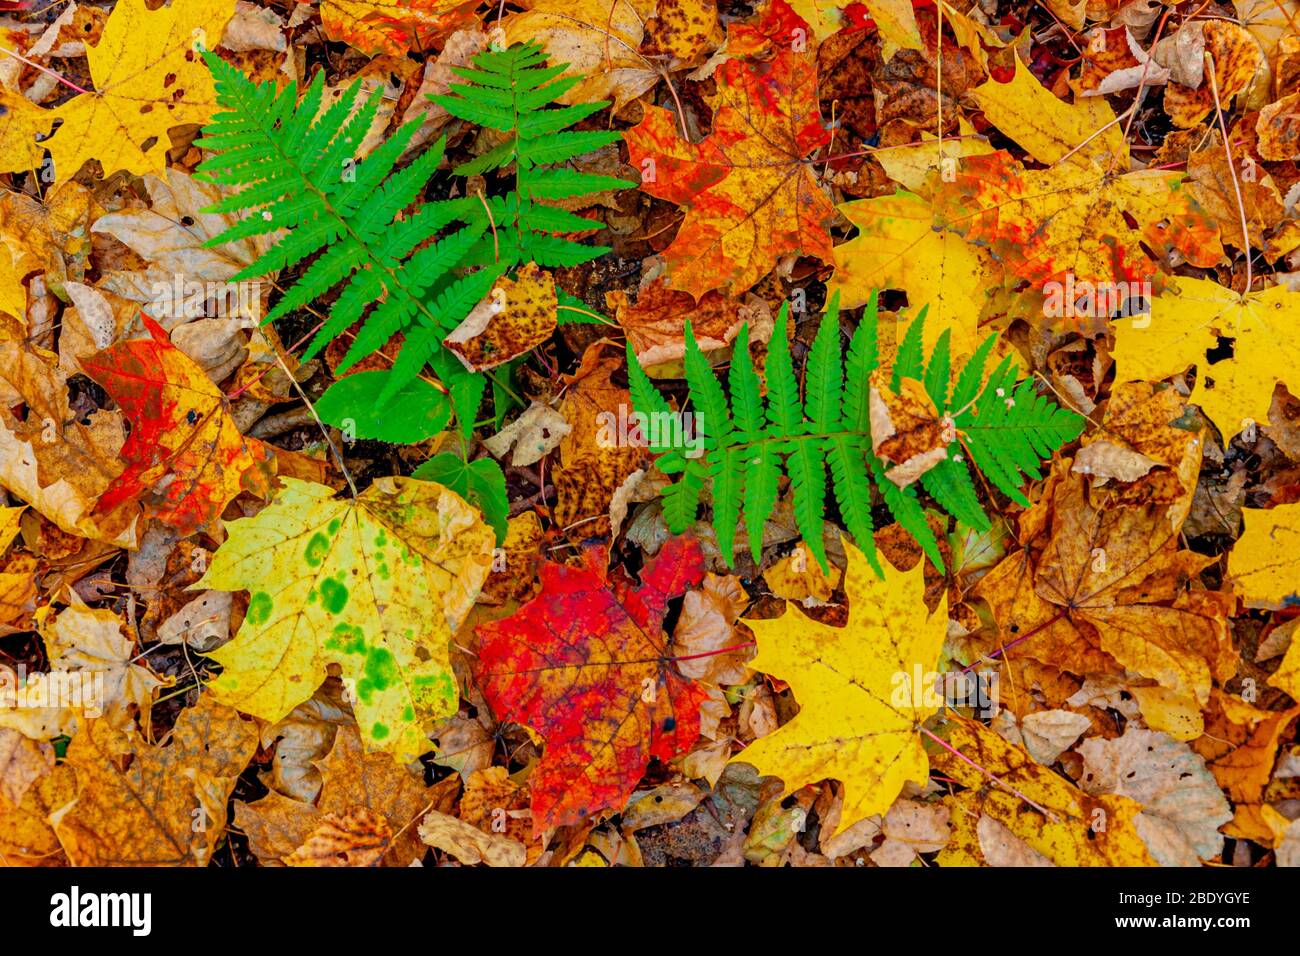 Colorful fallen red orange yellow autumn maple leaves. The green Bush of fern. Close up. Stock Photo